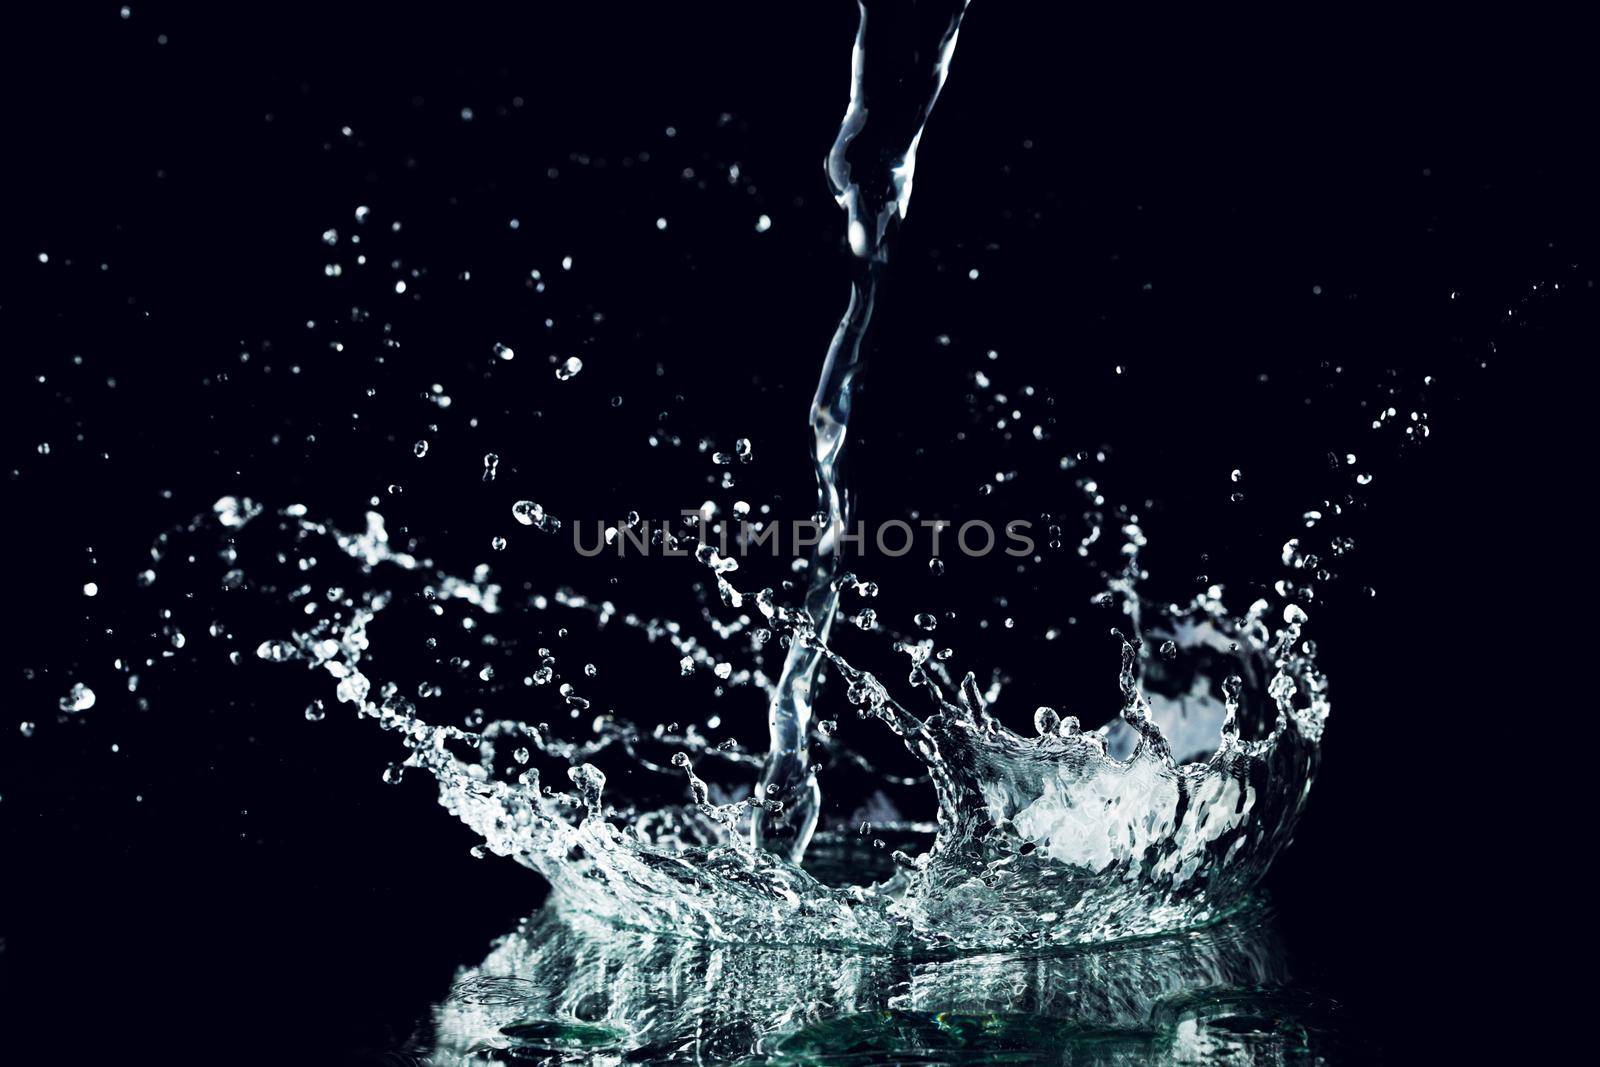 Water splash brilliant drops isolated on black background close-up